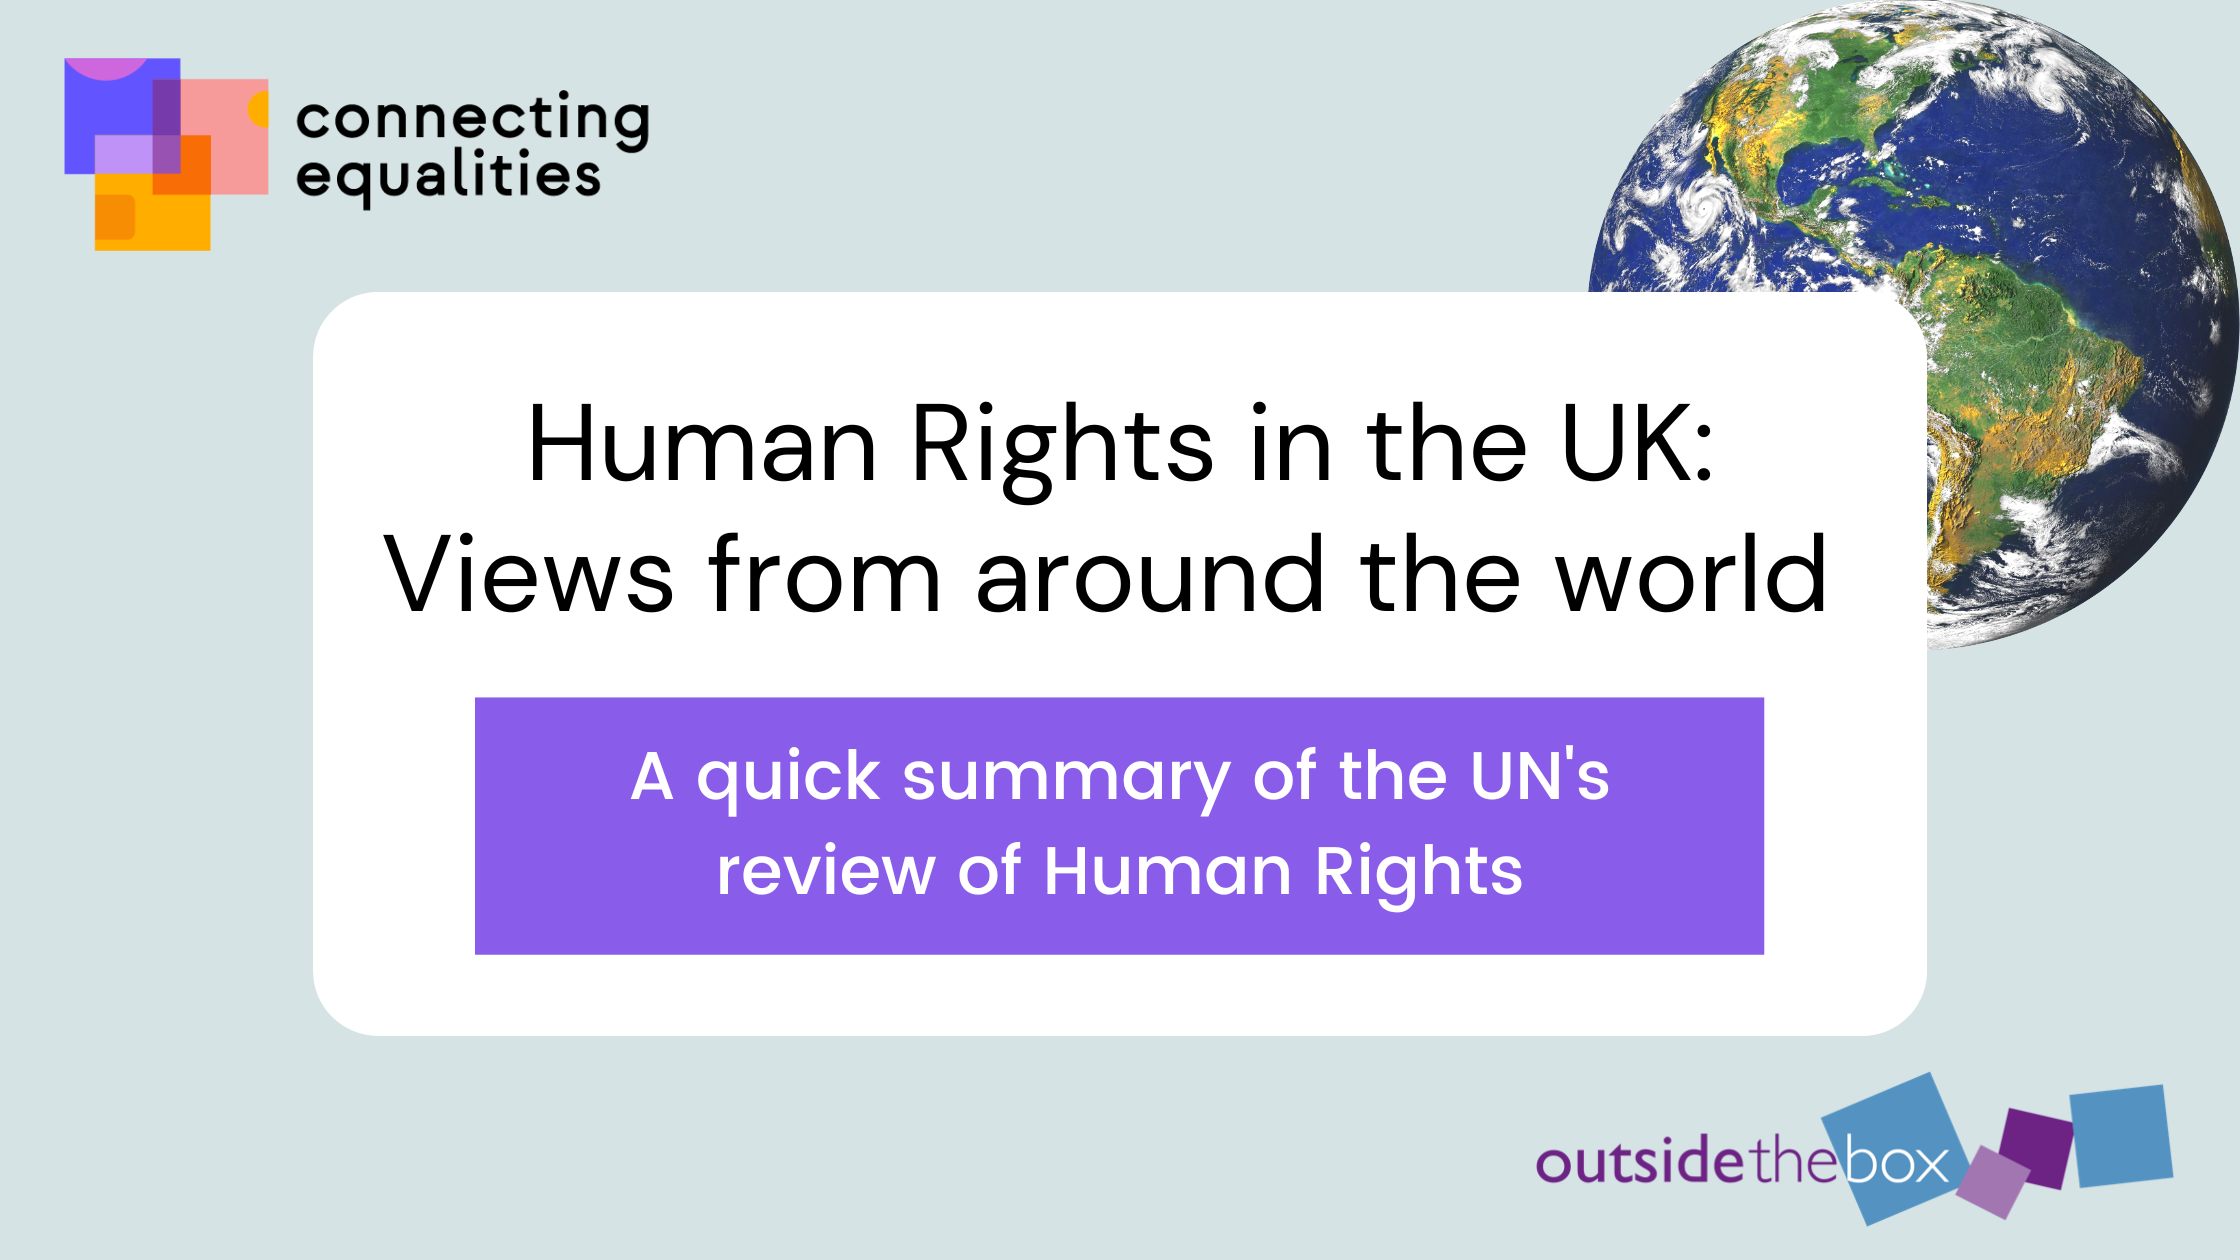 Human Rights in the UK Views from around the world. A quick summary of the UN's review of human rights